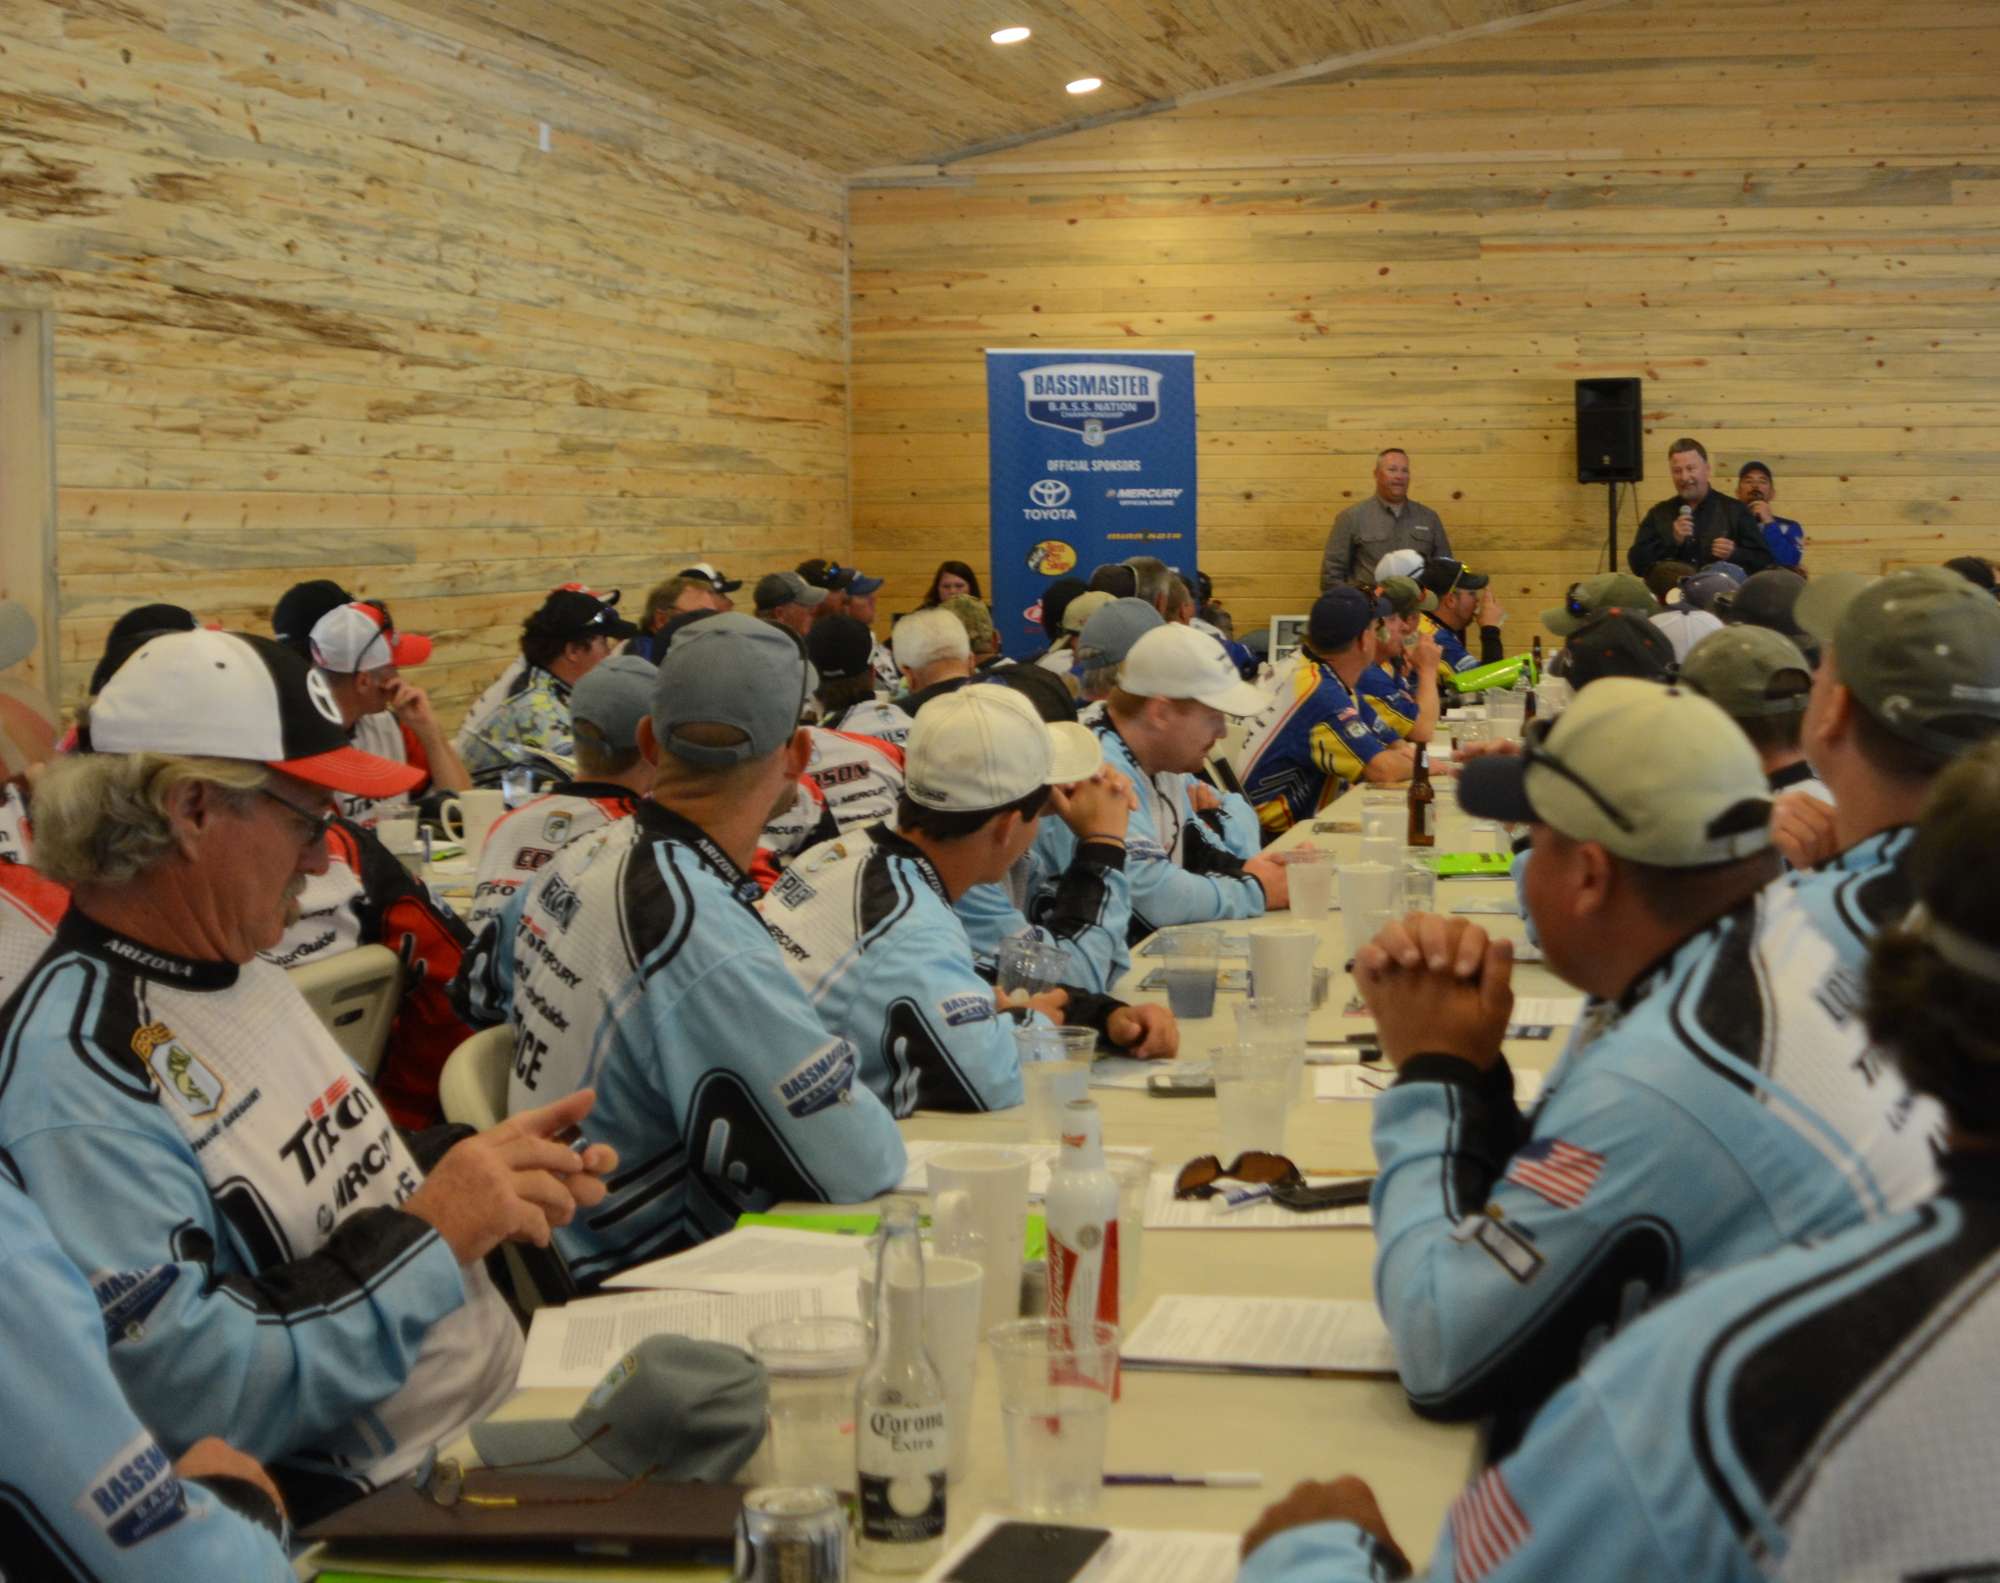 Competitors settle in for the tournament briefing.